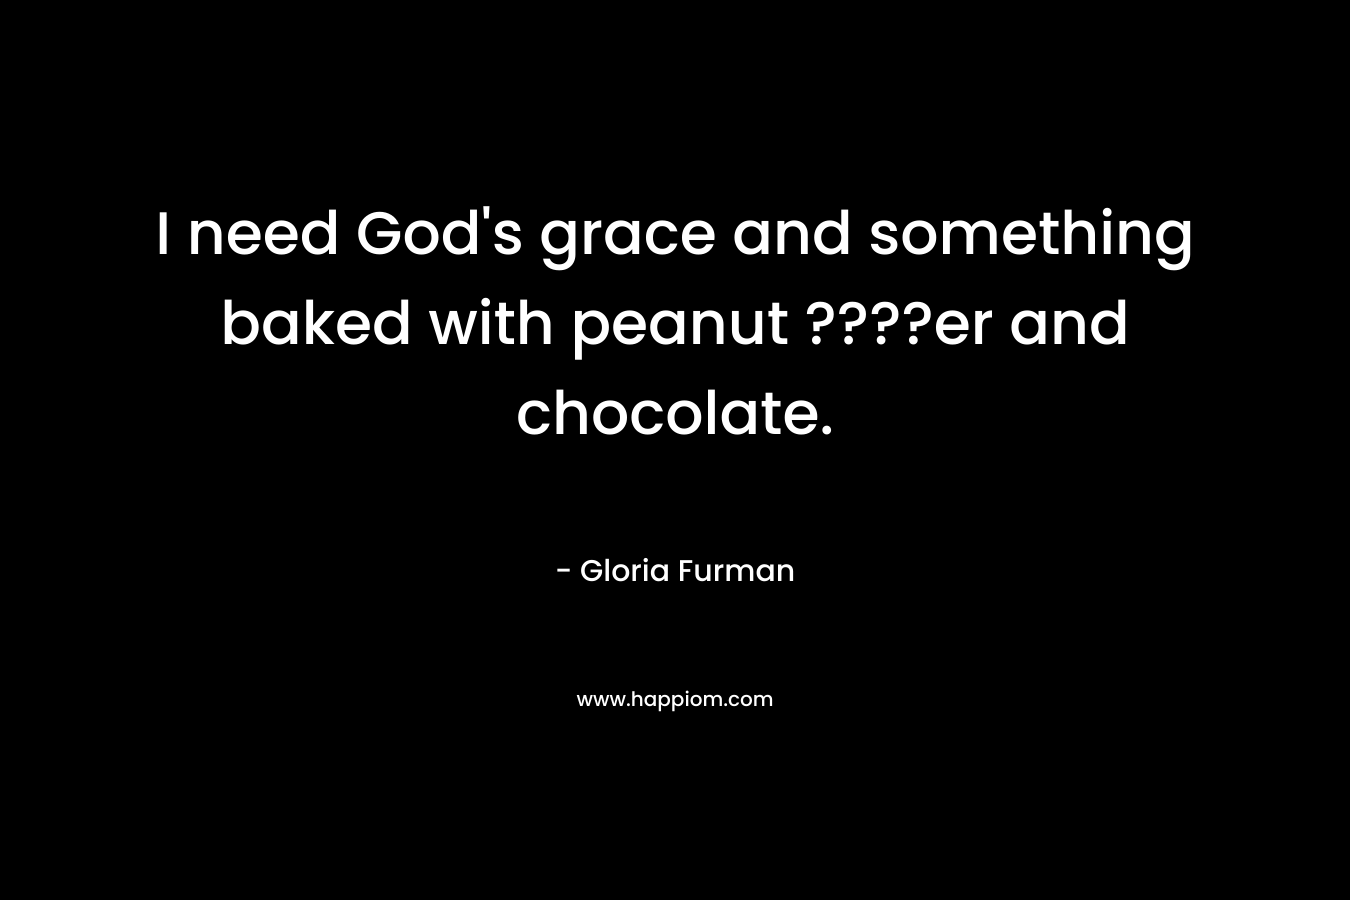 I need God's grace and something baked with peanut ????er and chocolate.